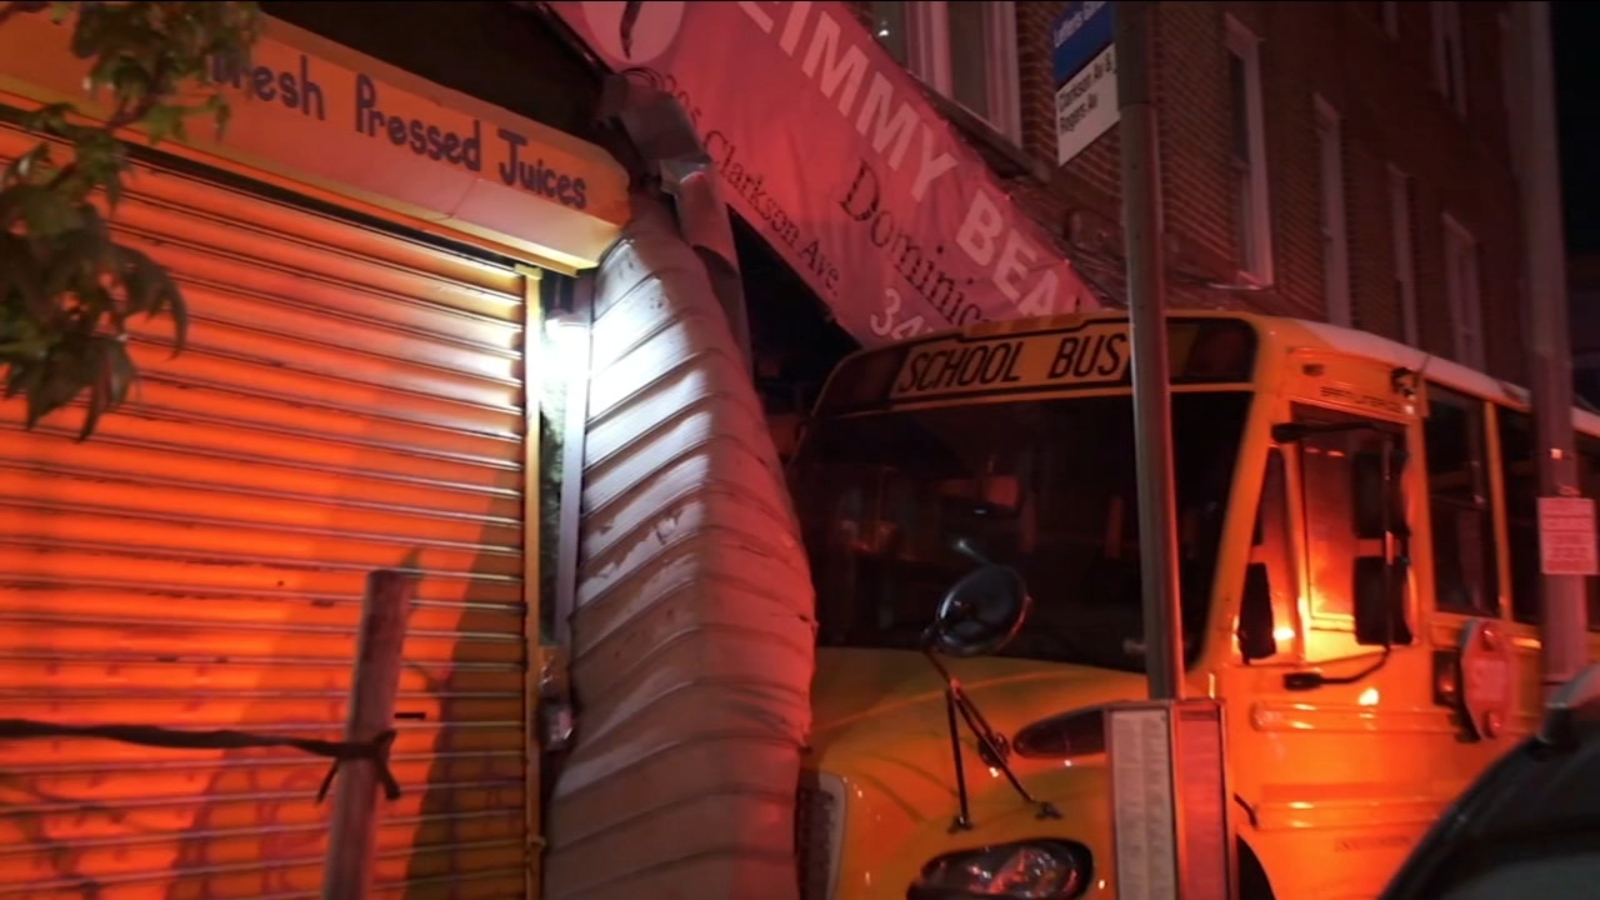 Bus rams into Prospect Lefferts Gardens building, no injuries reported